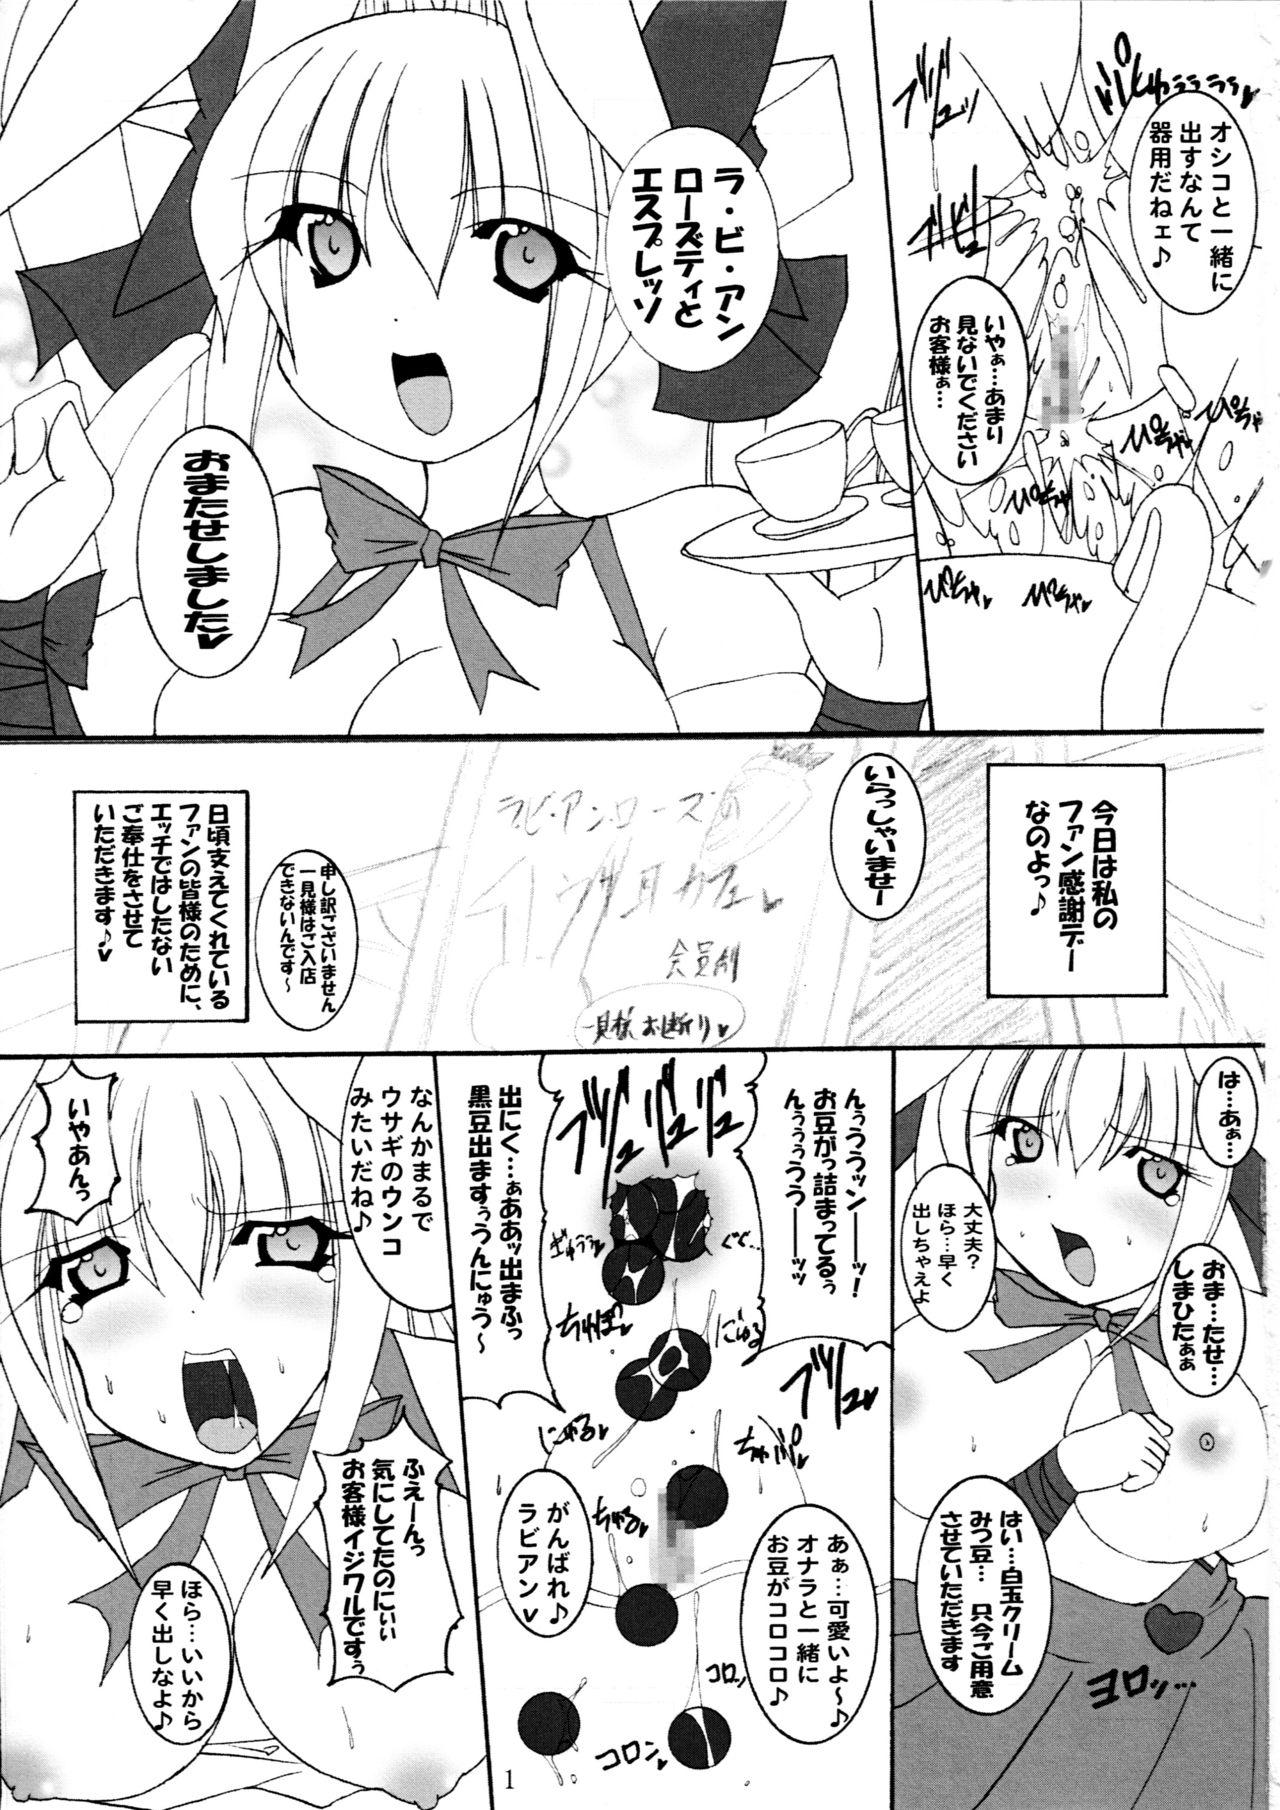 Anal Hitori Twintail & Abnormal Carnival - Di gi charat Hot Whores - Page 2